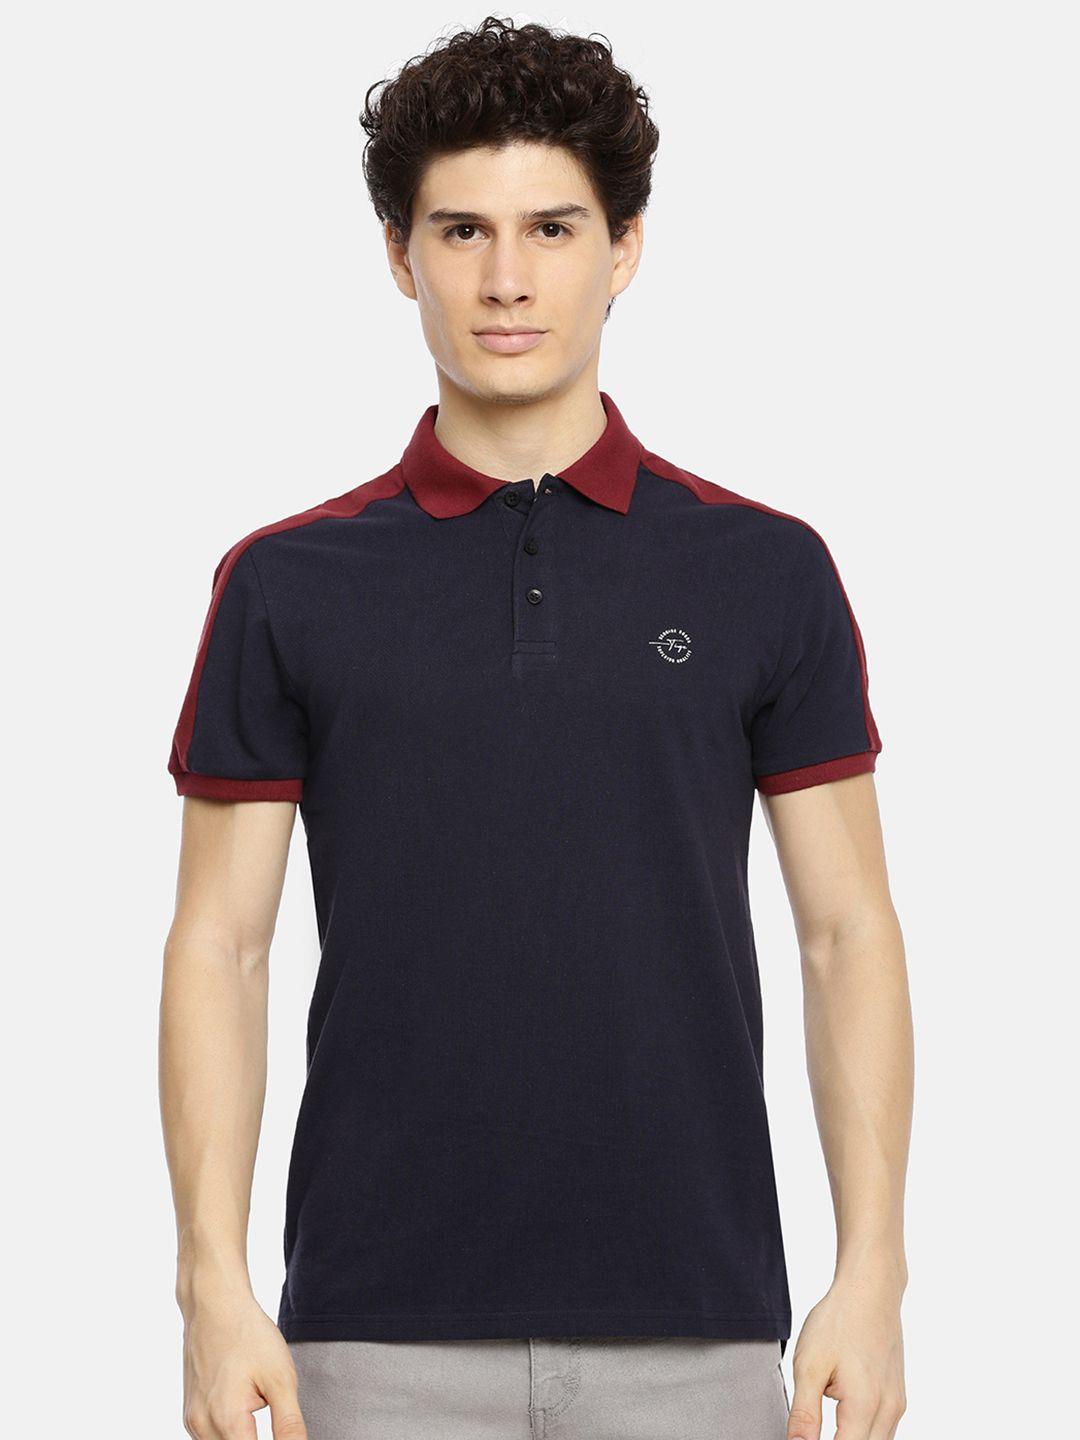 the indian garage co men navy blue & red solid polo collar t-shirt